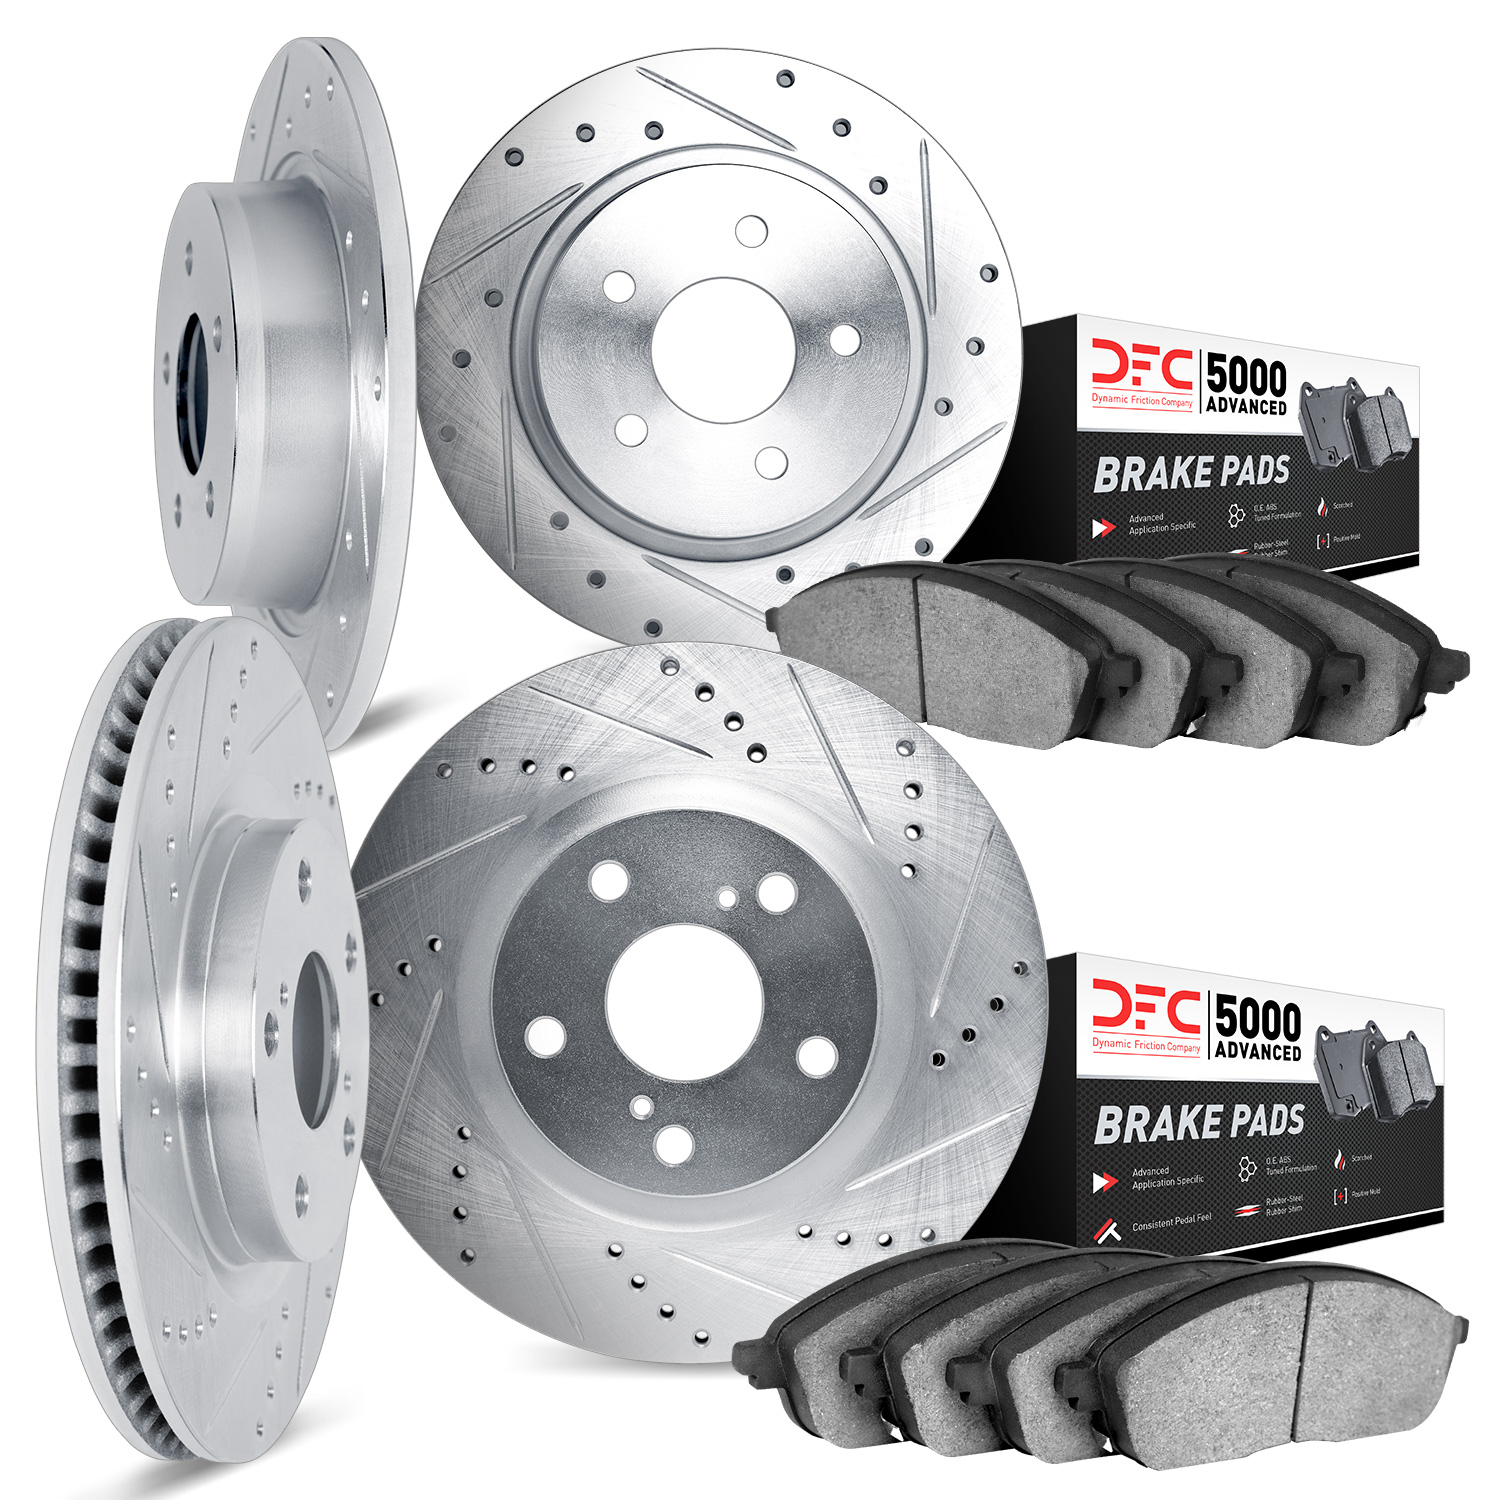 7504-54289 Drilled/Slotted Brake Rotors w/5000 Advanced Brake Pads Kit [Silver], 2003-2005 Ford/Lincoln/Mercury/Mazda, Position: